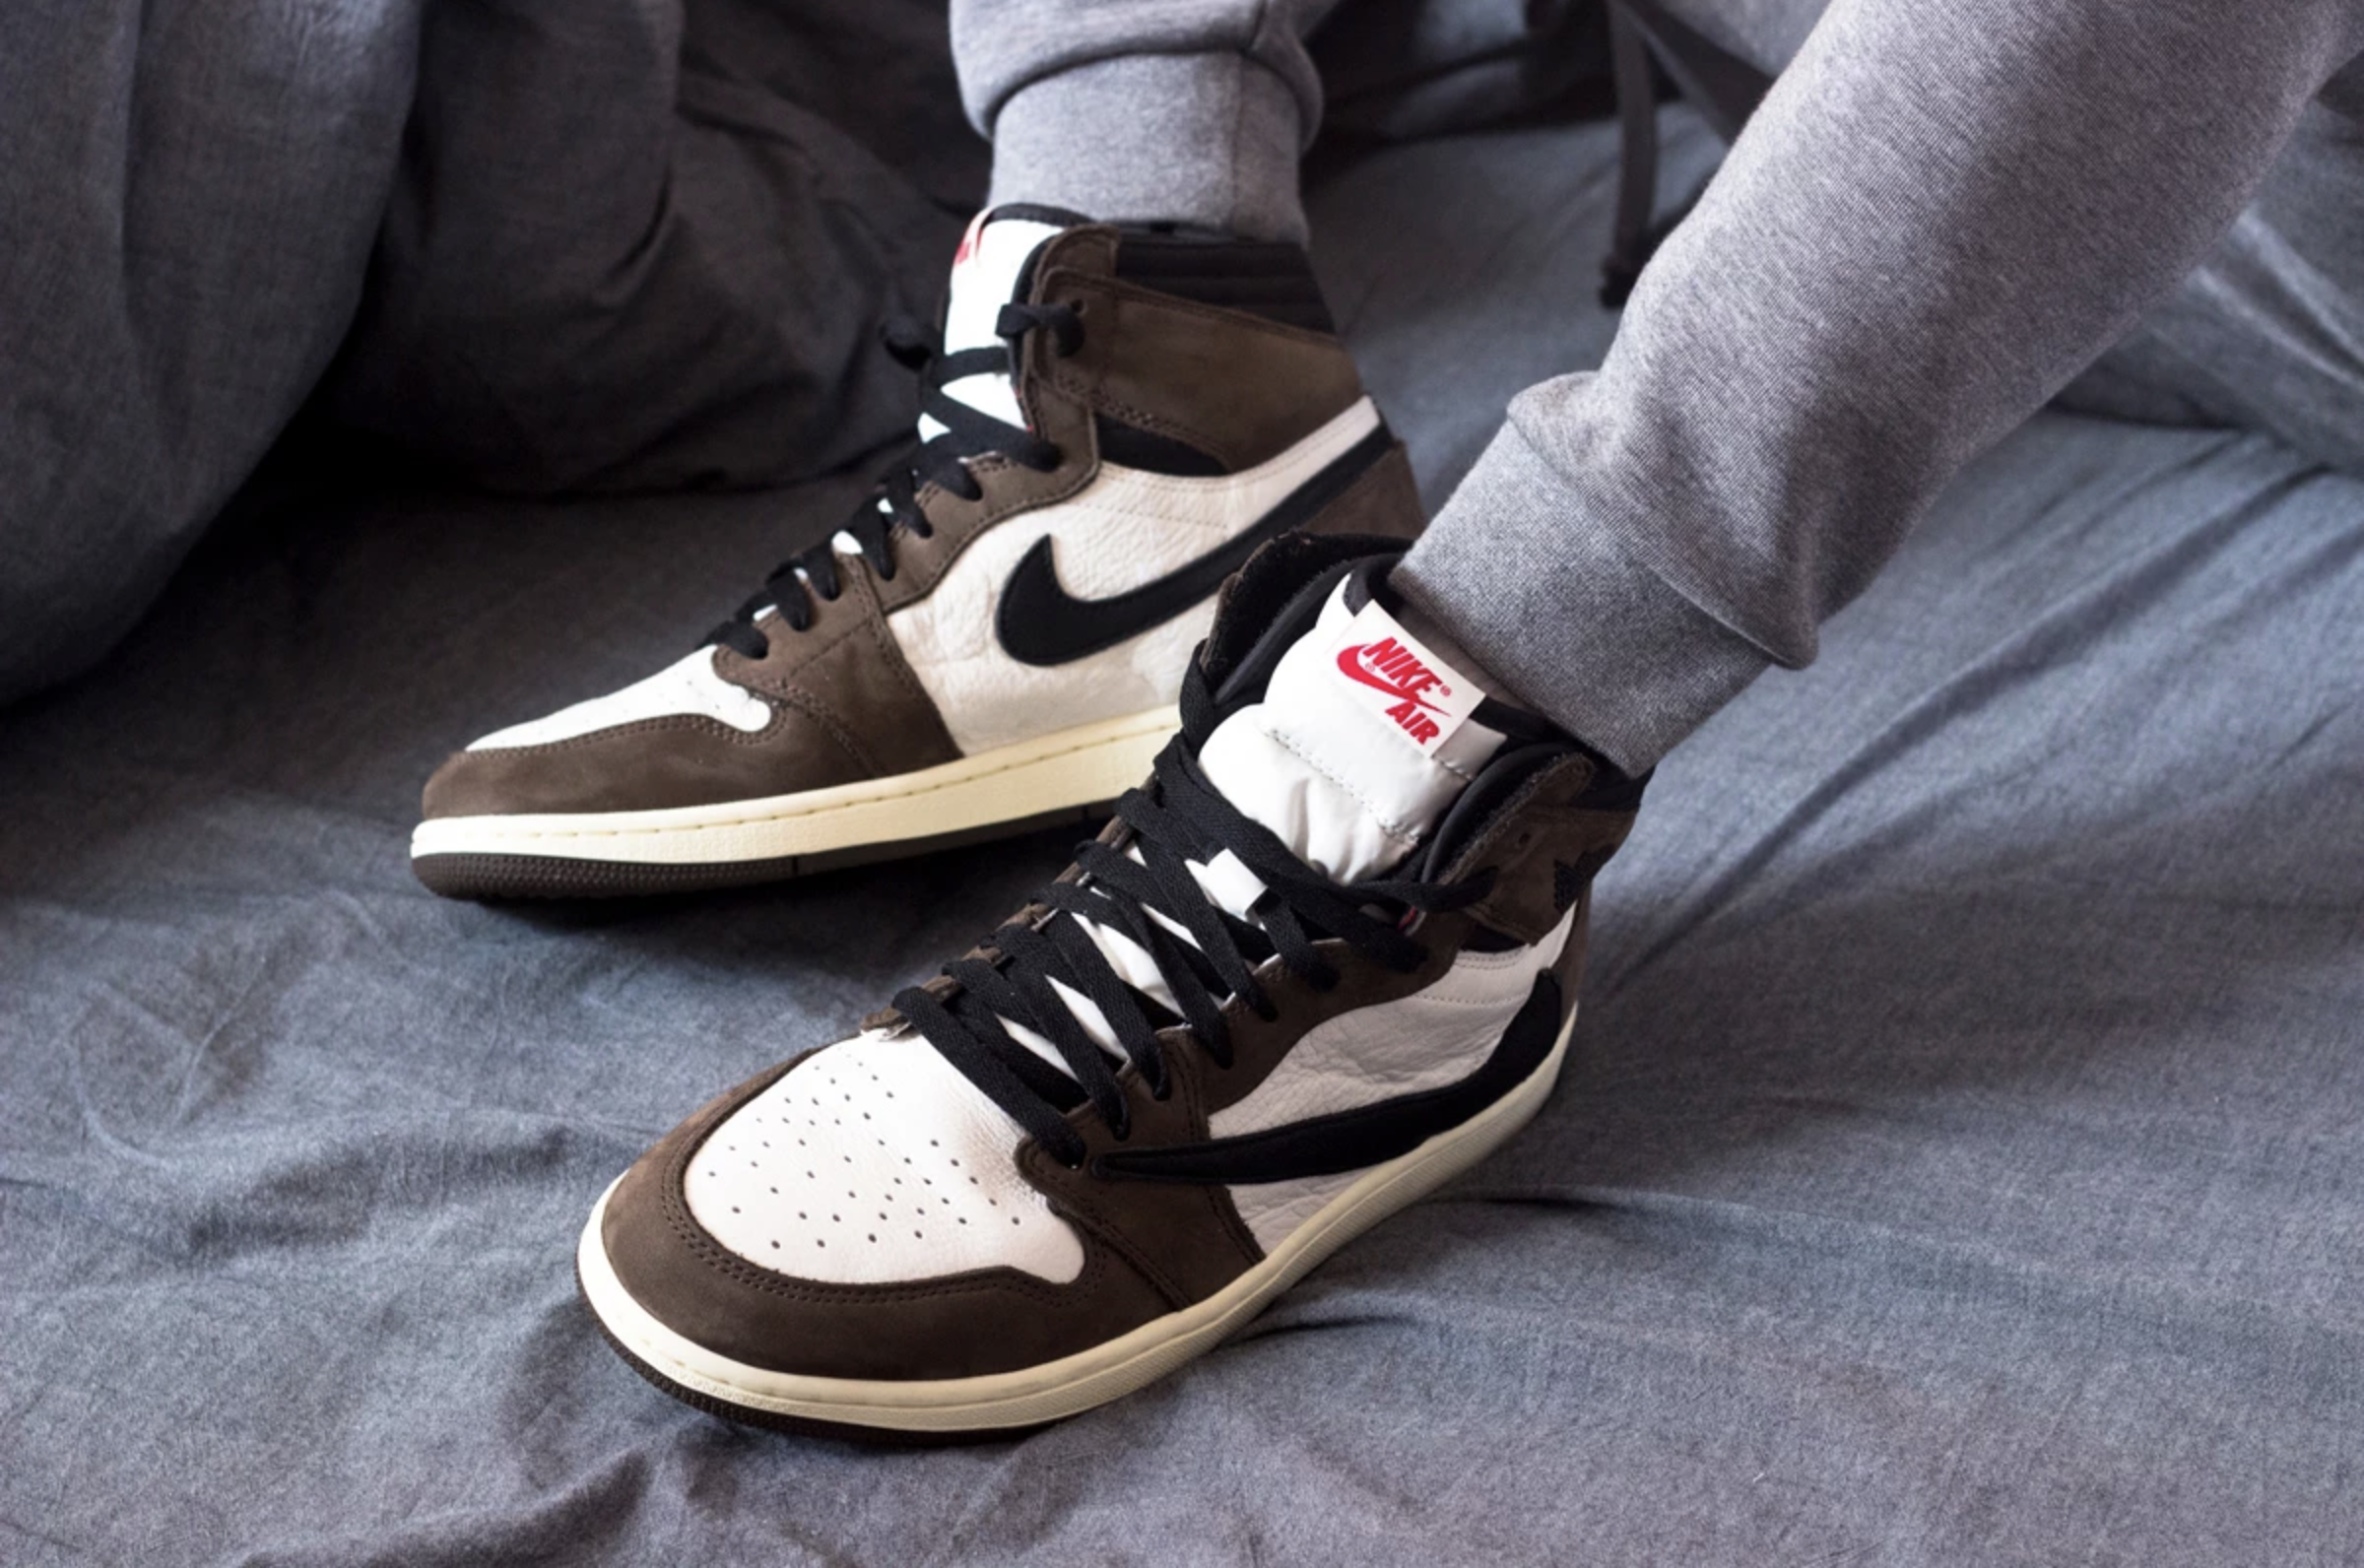 Free download Discover the new image of the Air Jordan 1 Cactus